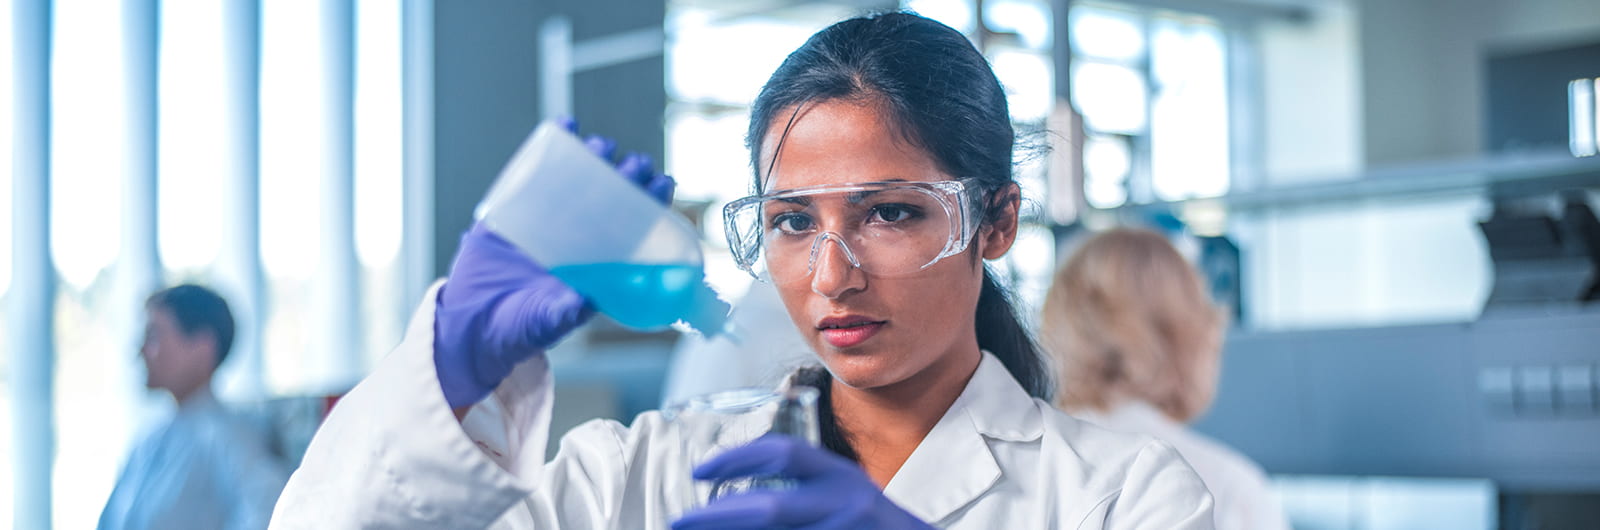 A photo of a female scientist